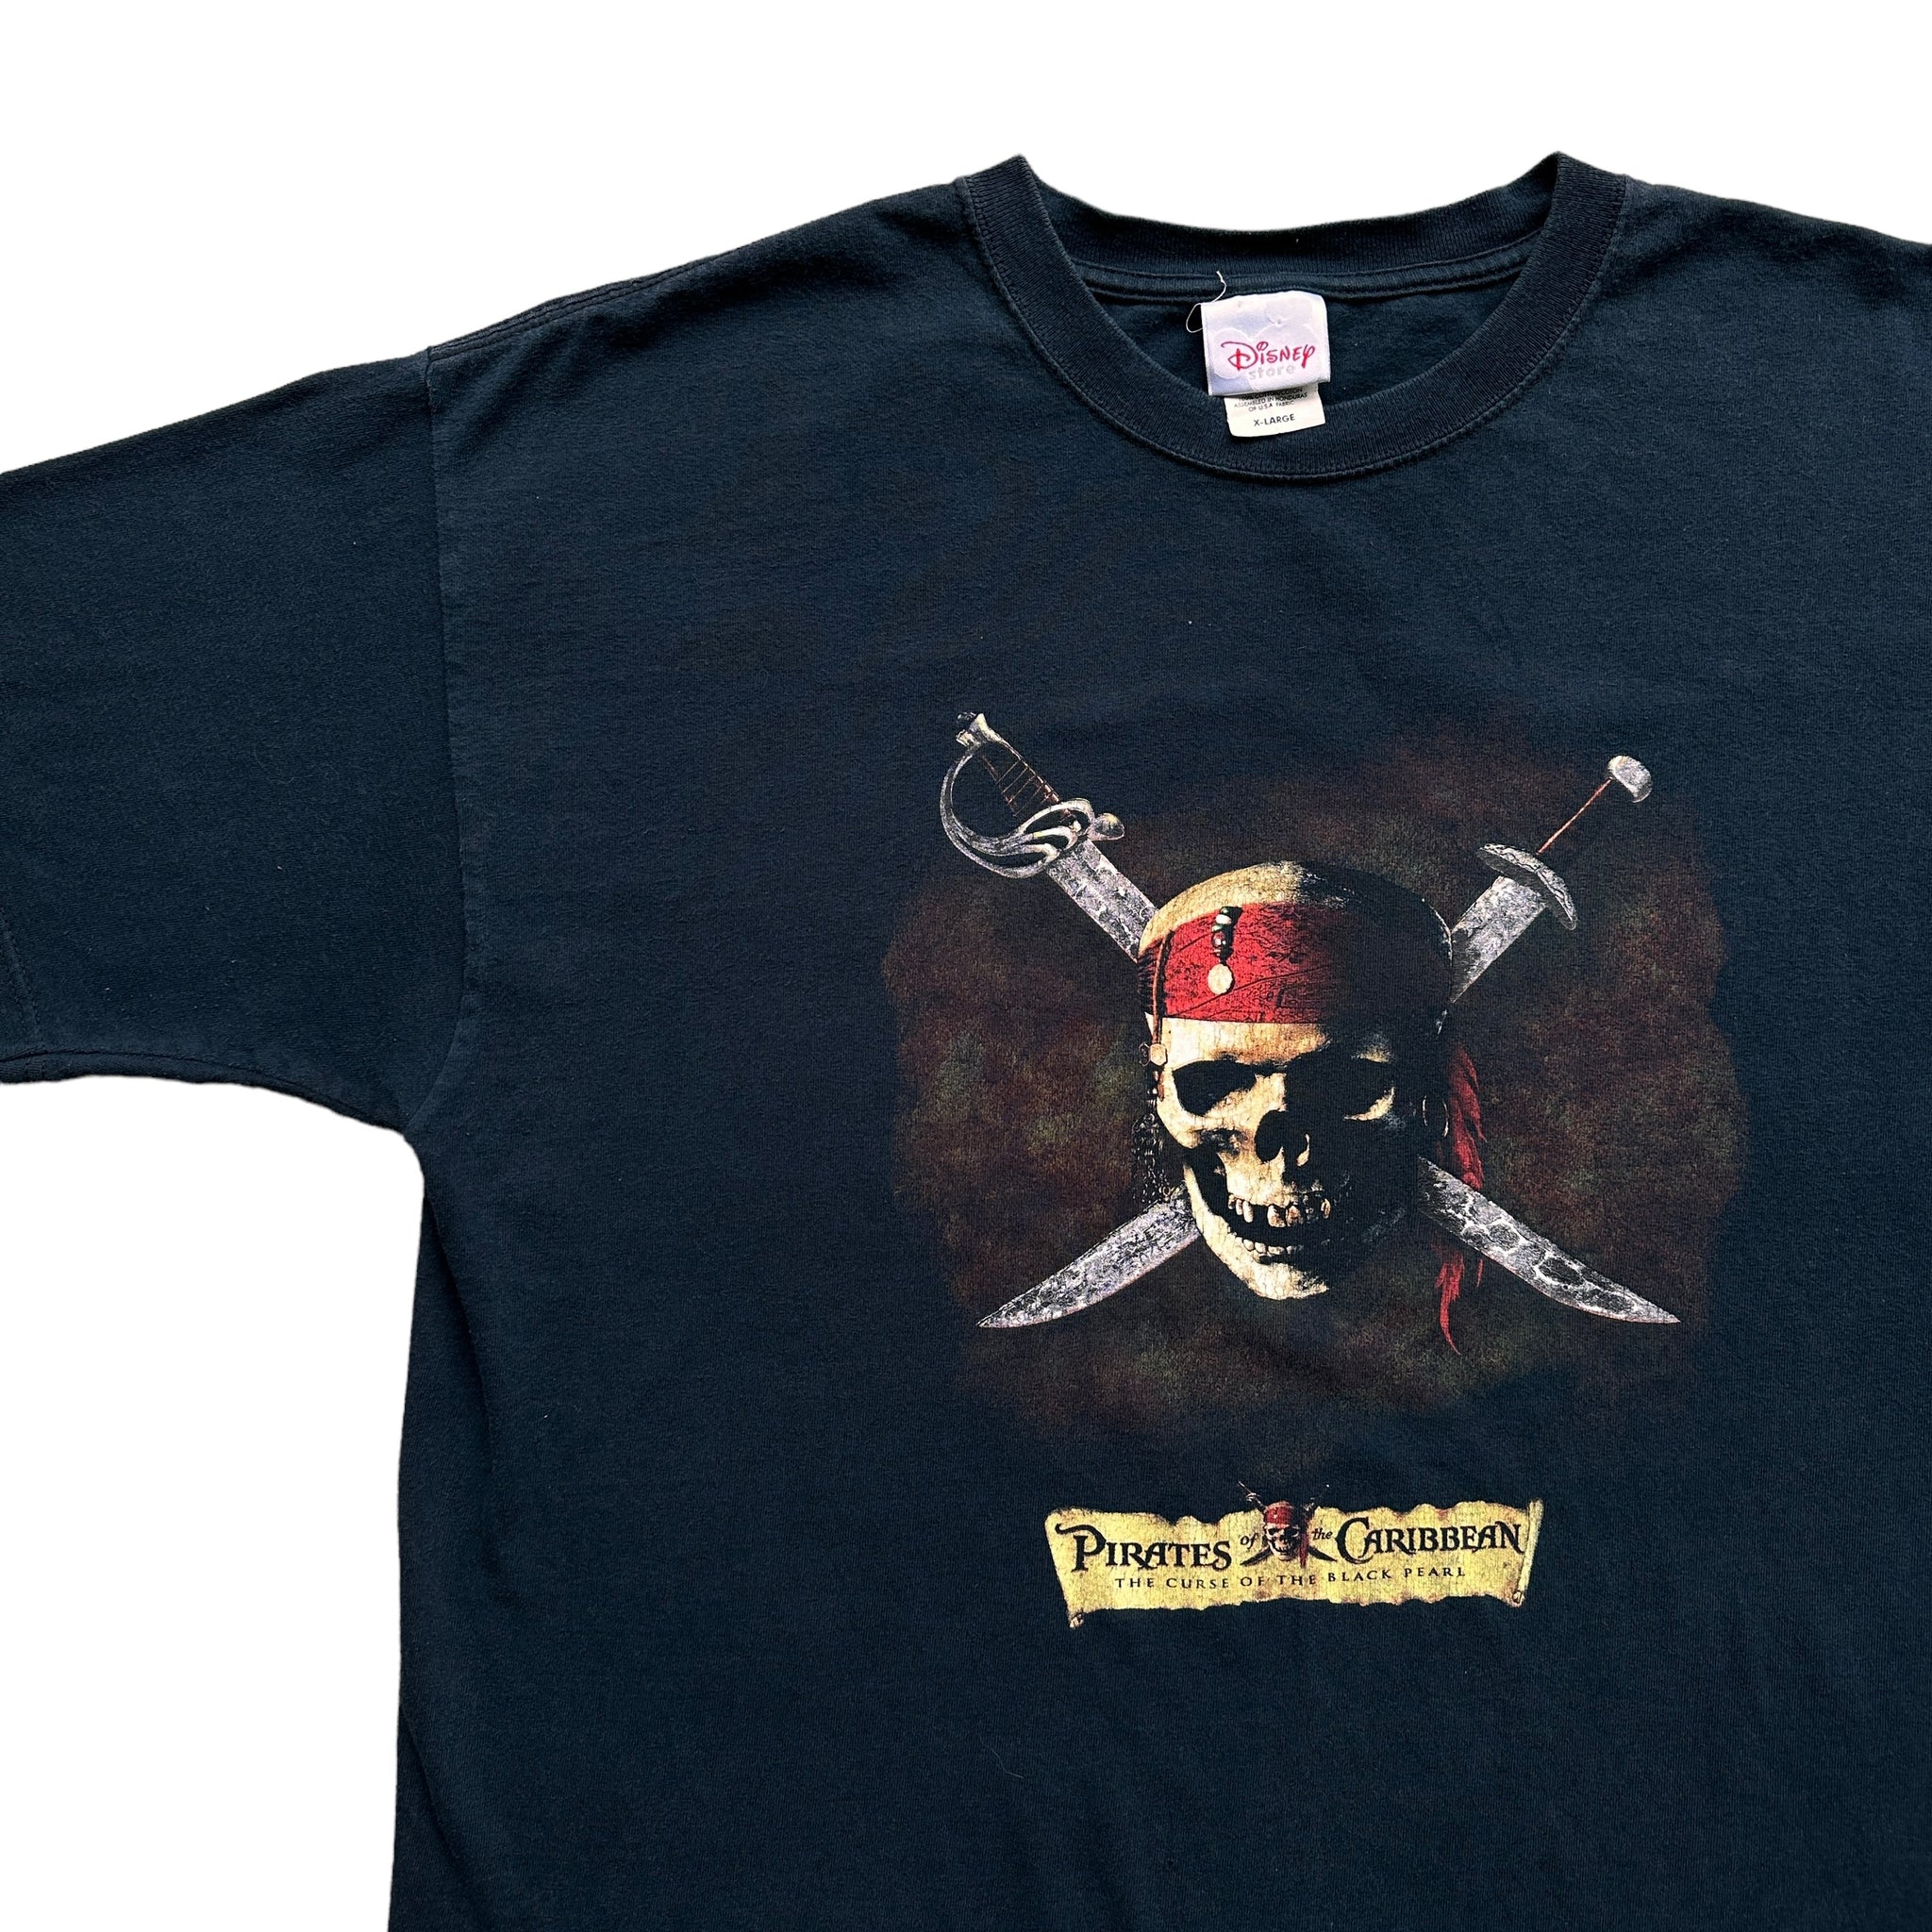 Pirates of the caribbean tee XL